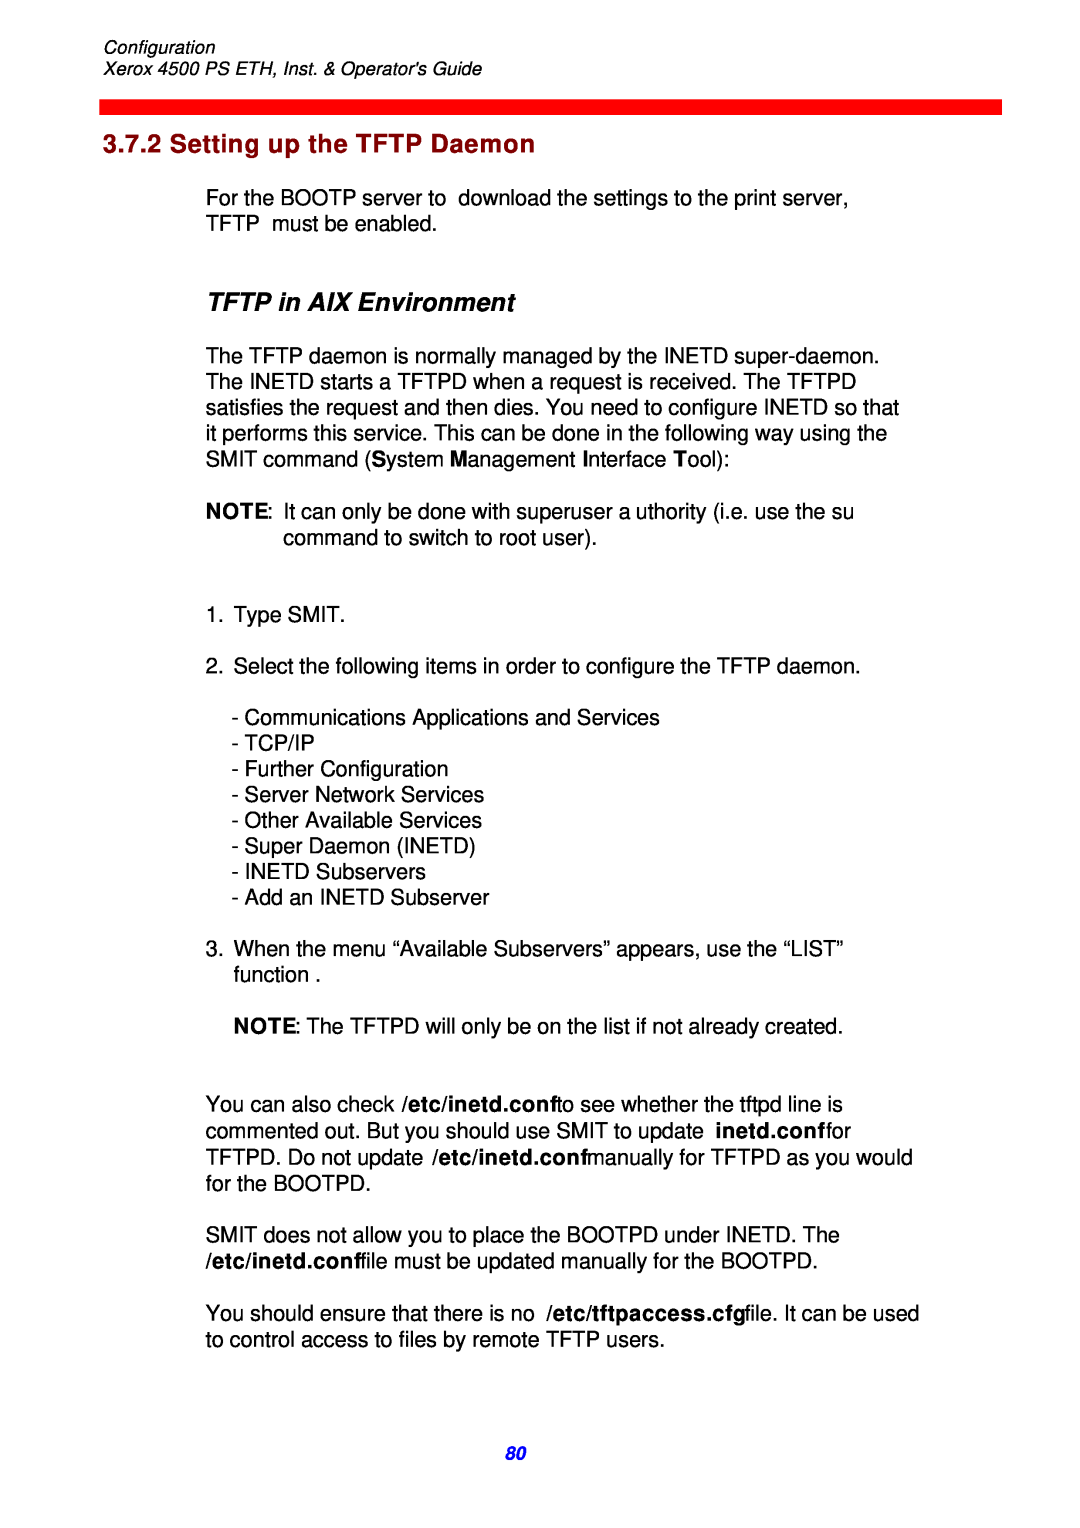 Xerox 4500 ps eth instruction manual Setting up the TFTP Daemon, TFTP in AIX Environment 